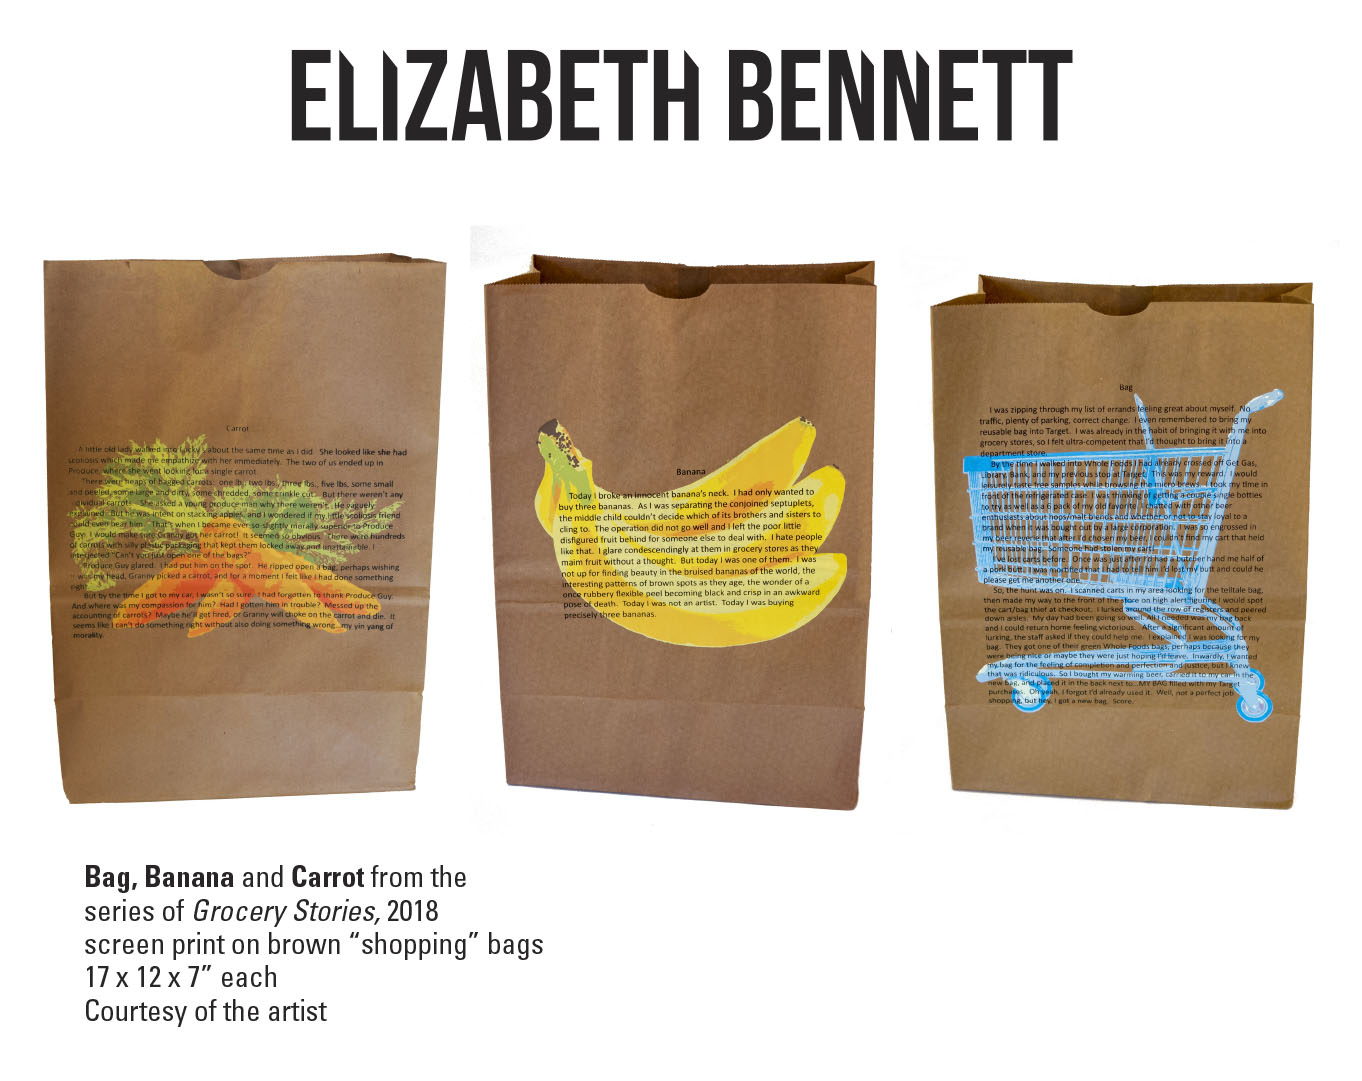 The brown paper bags, each with a different image and text printed on top